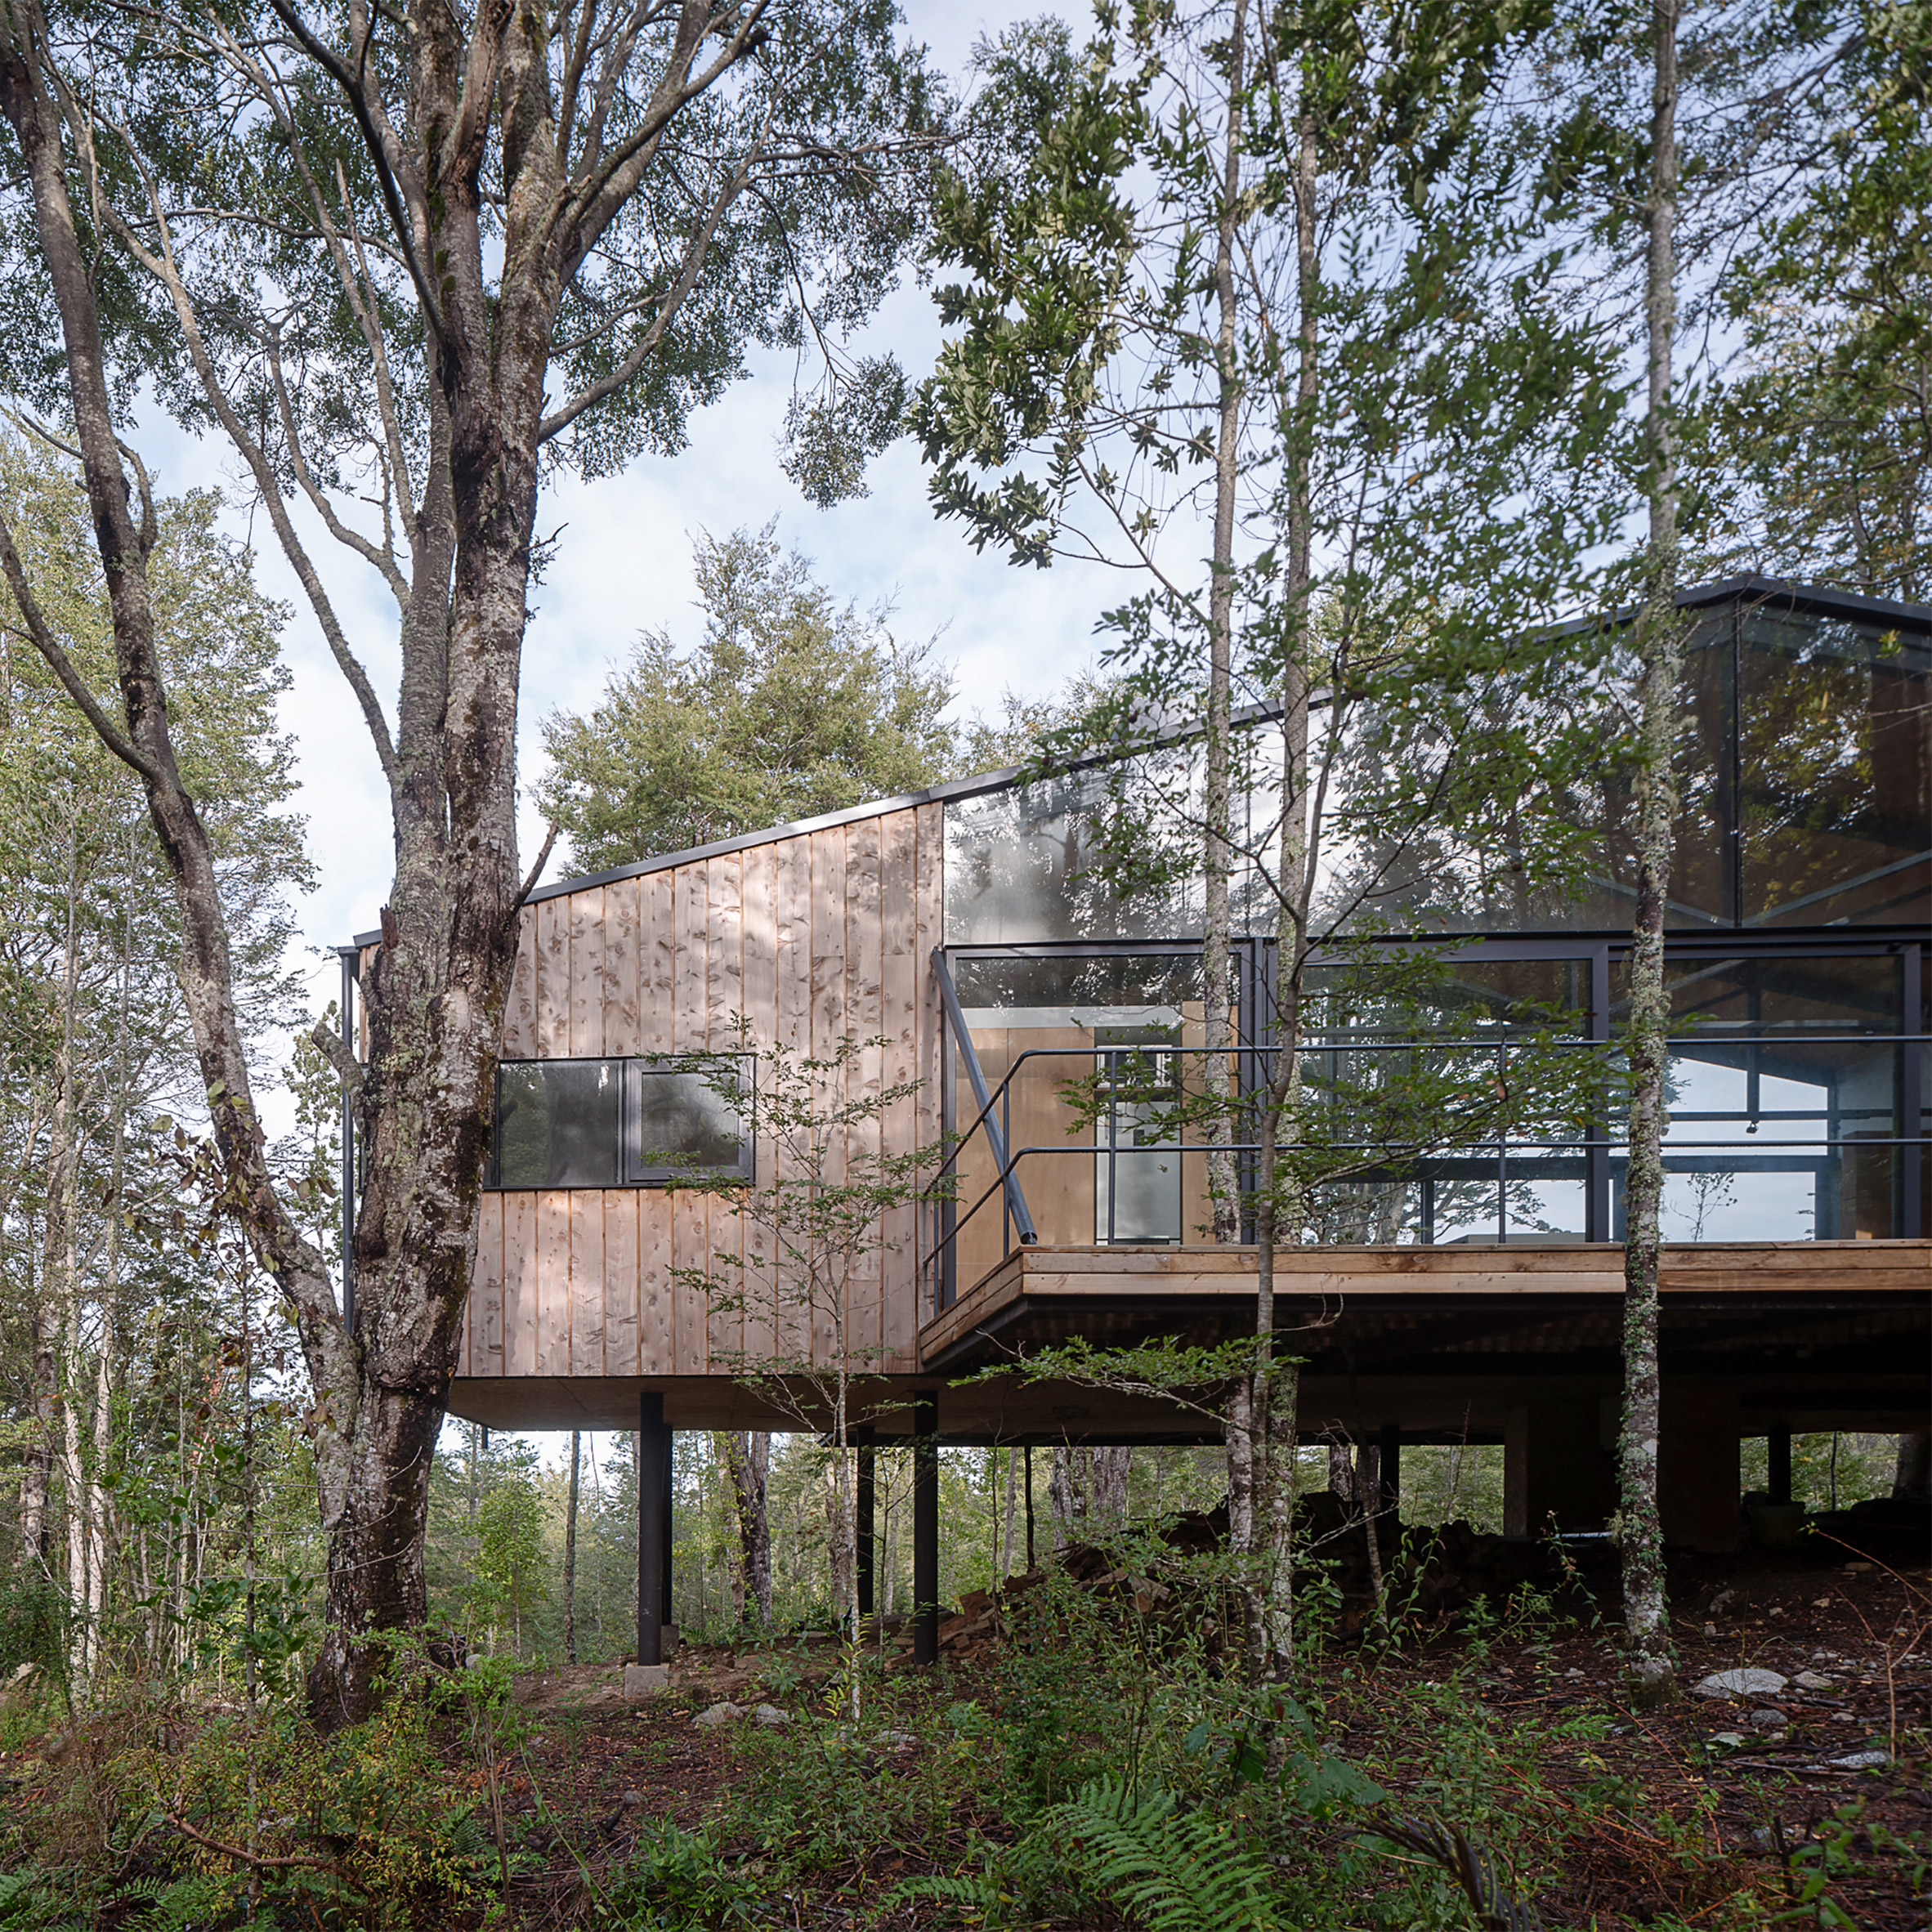 A horizontal cabin in the trees